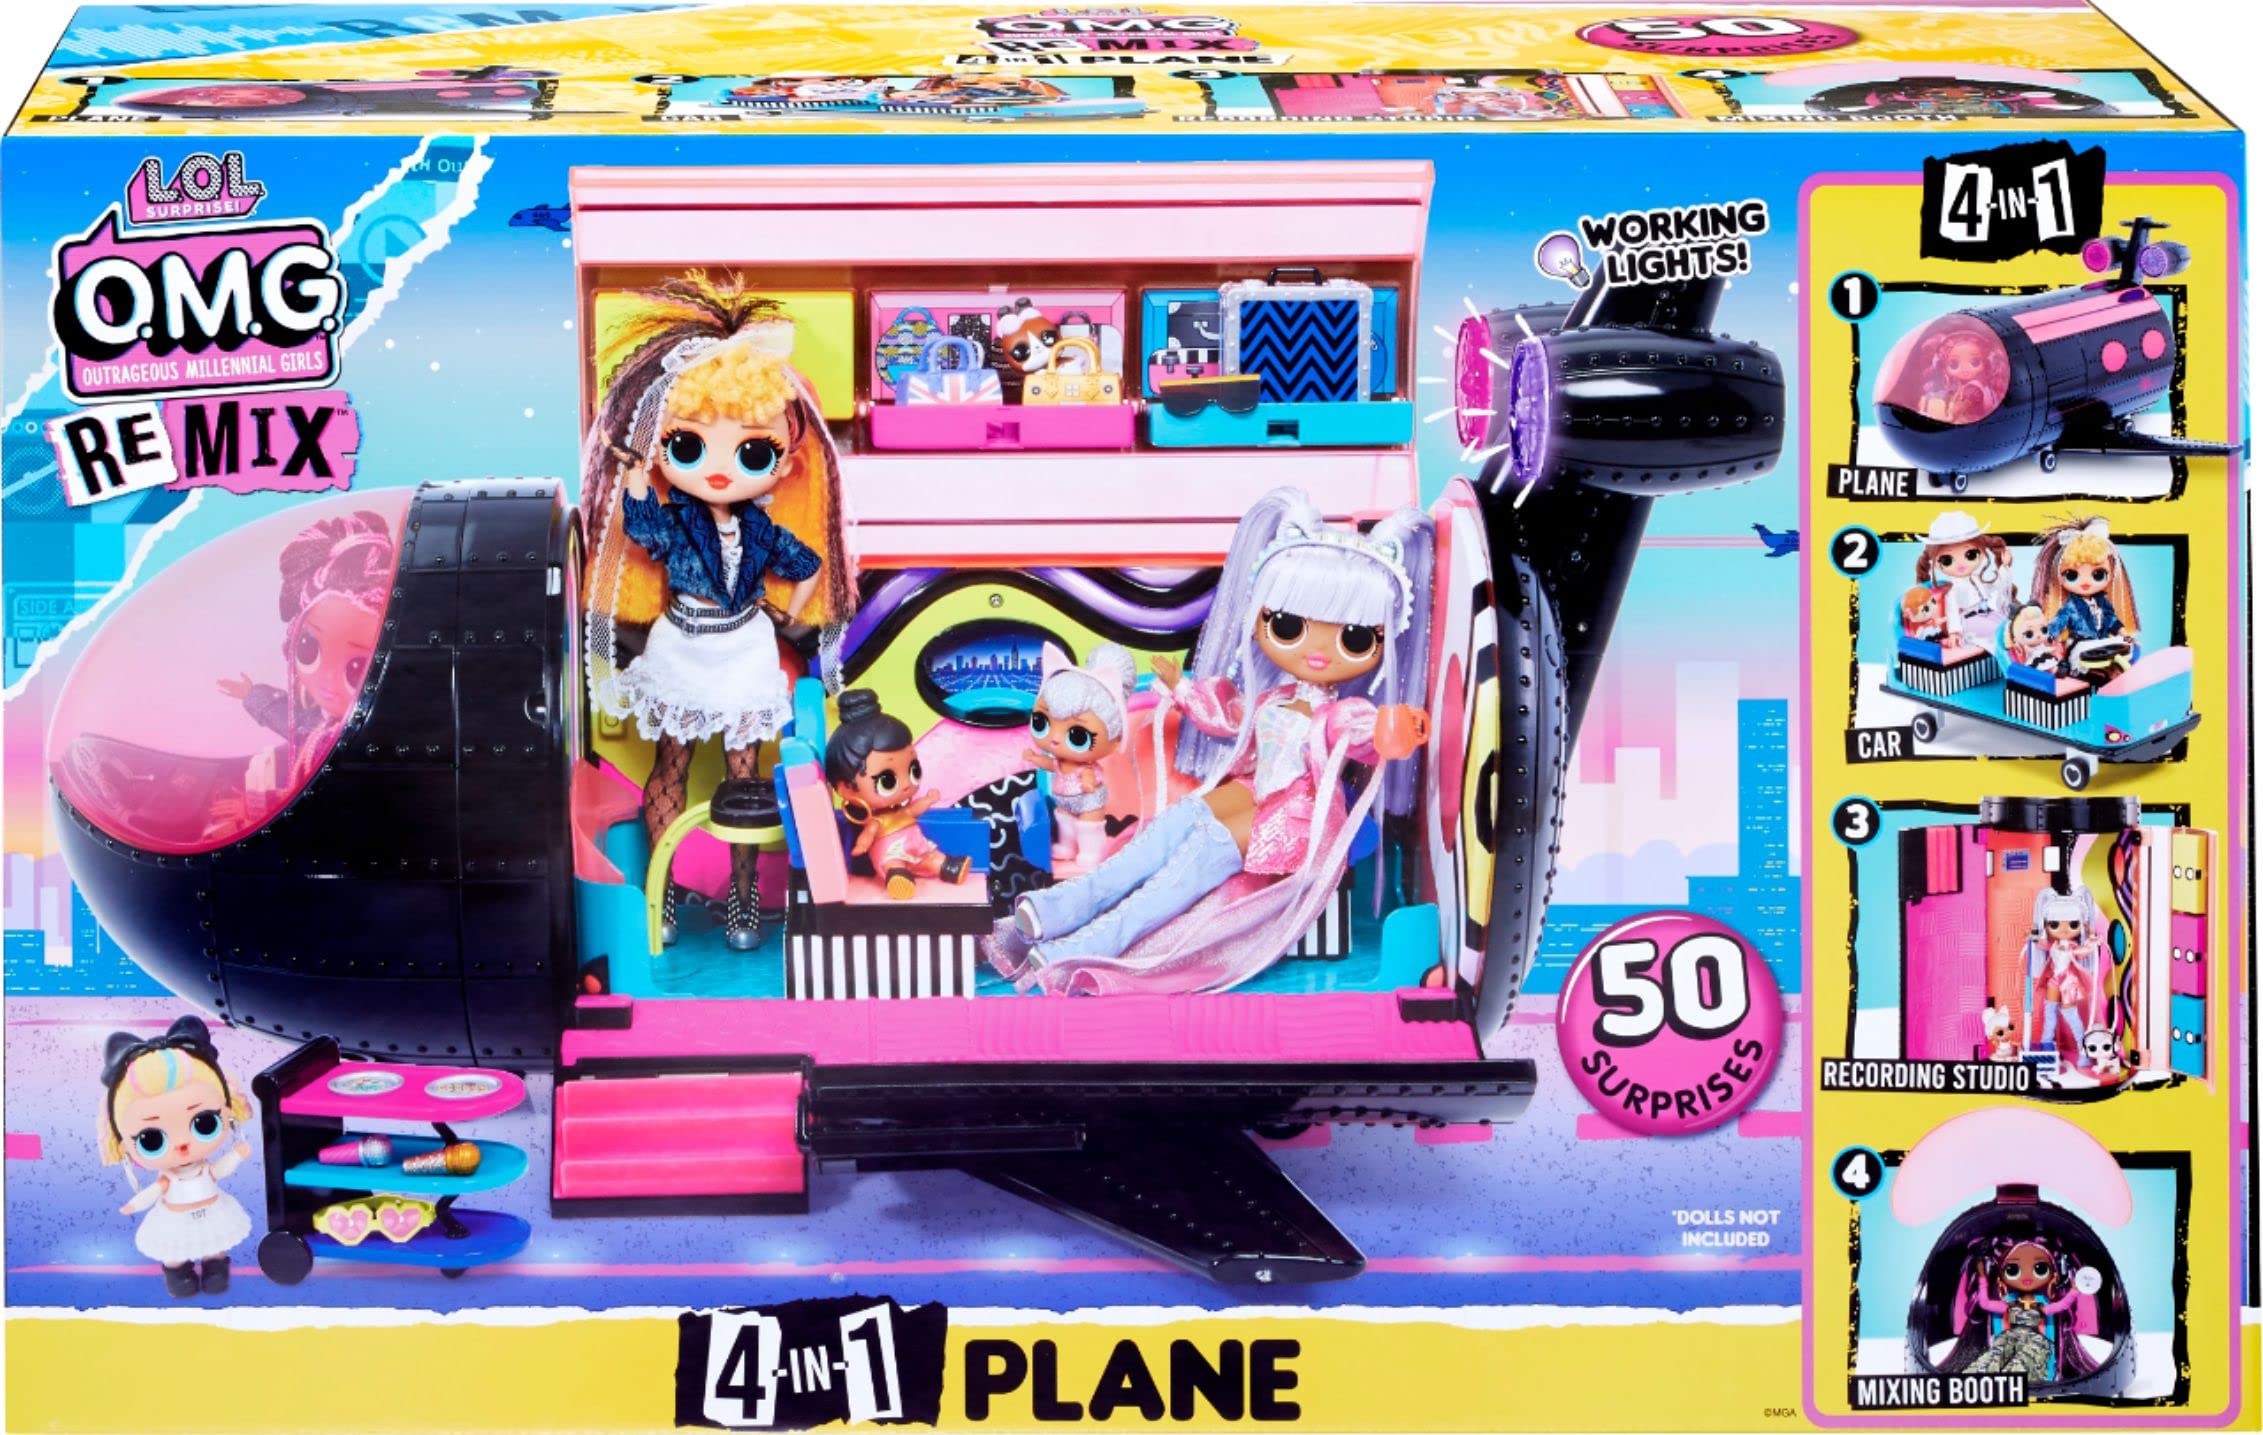 LOL Surprise OMG Remix 4 in 1 Exclusive Plane Playset Transforms 50 Surprises - Airplane, Car, Recording Studio, Mixing Booth with Colorful Doll Accessories, Play Set Gift for Kids Ages 6-11